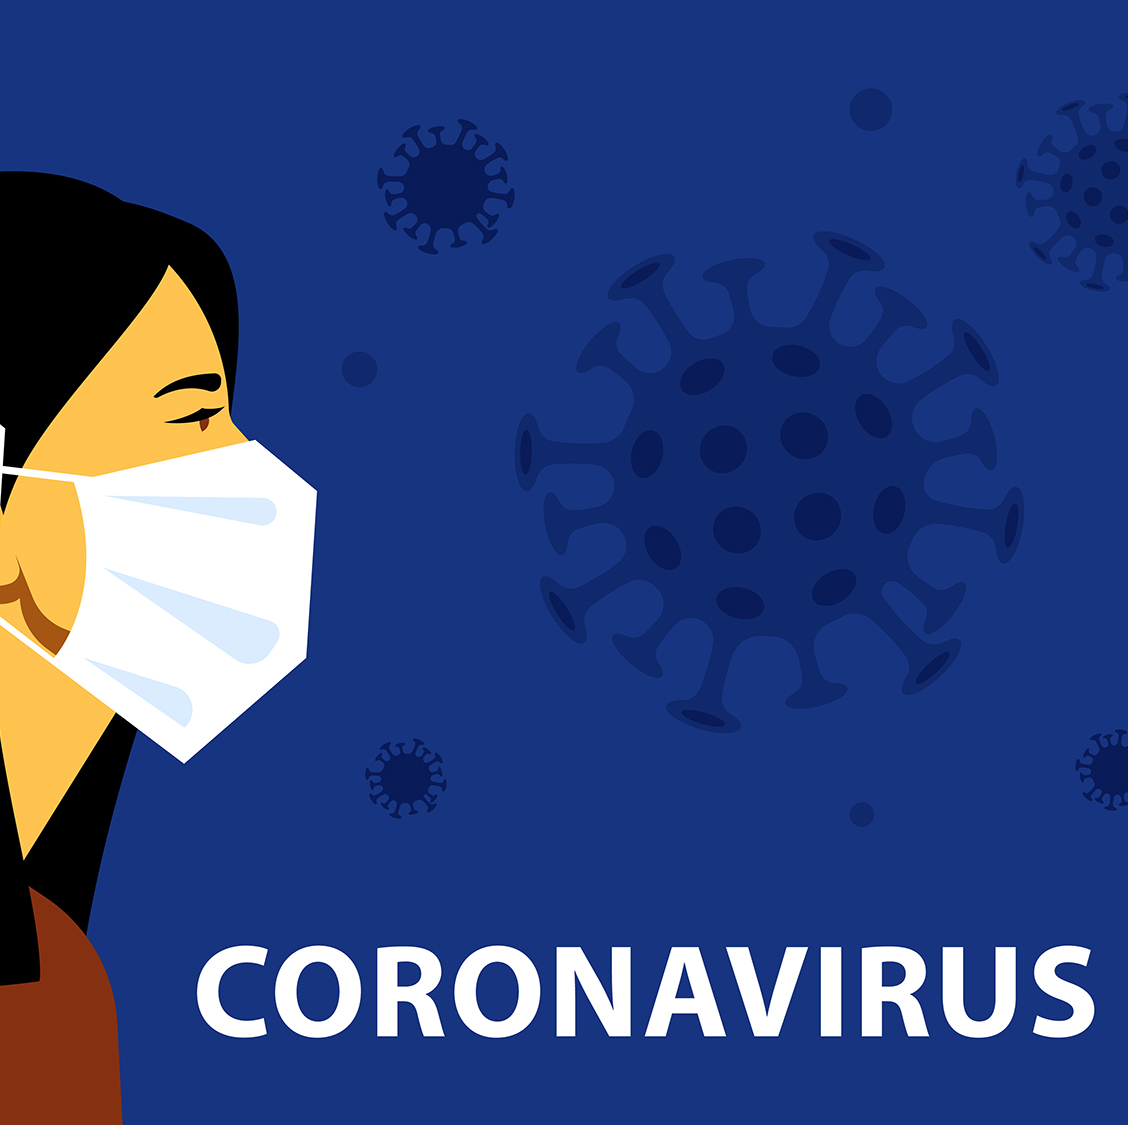 Does gender explain why women die of the novel coronavirus (COVID-19) at a much lower rate than men do?